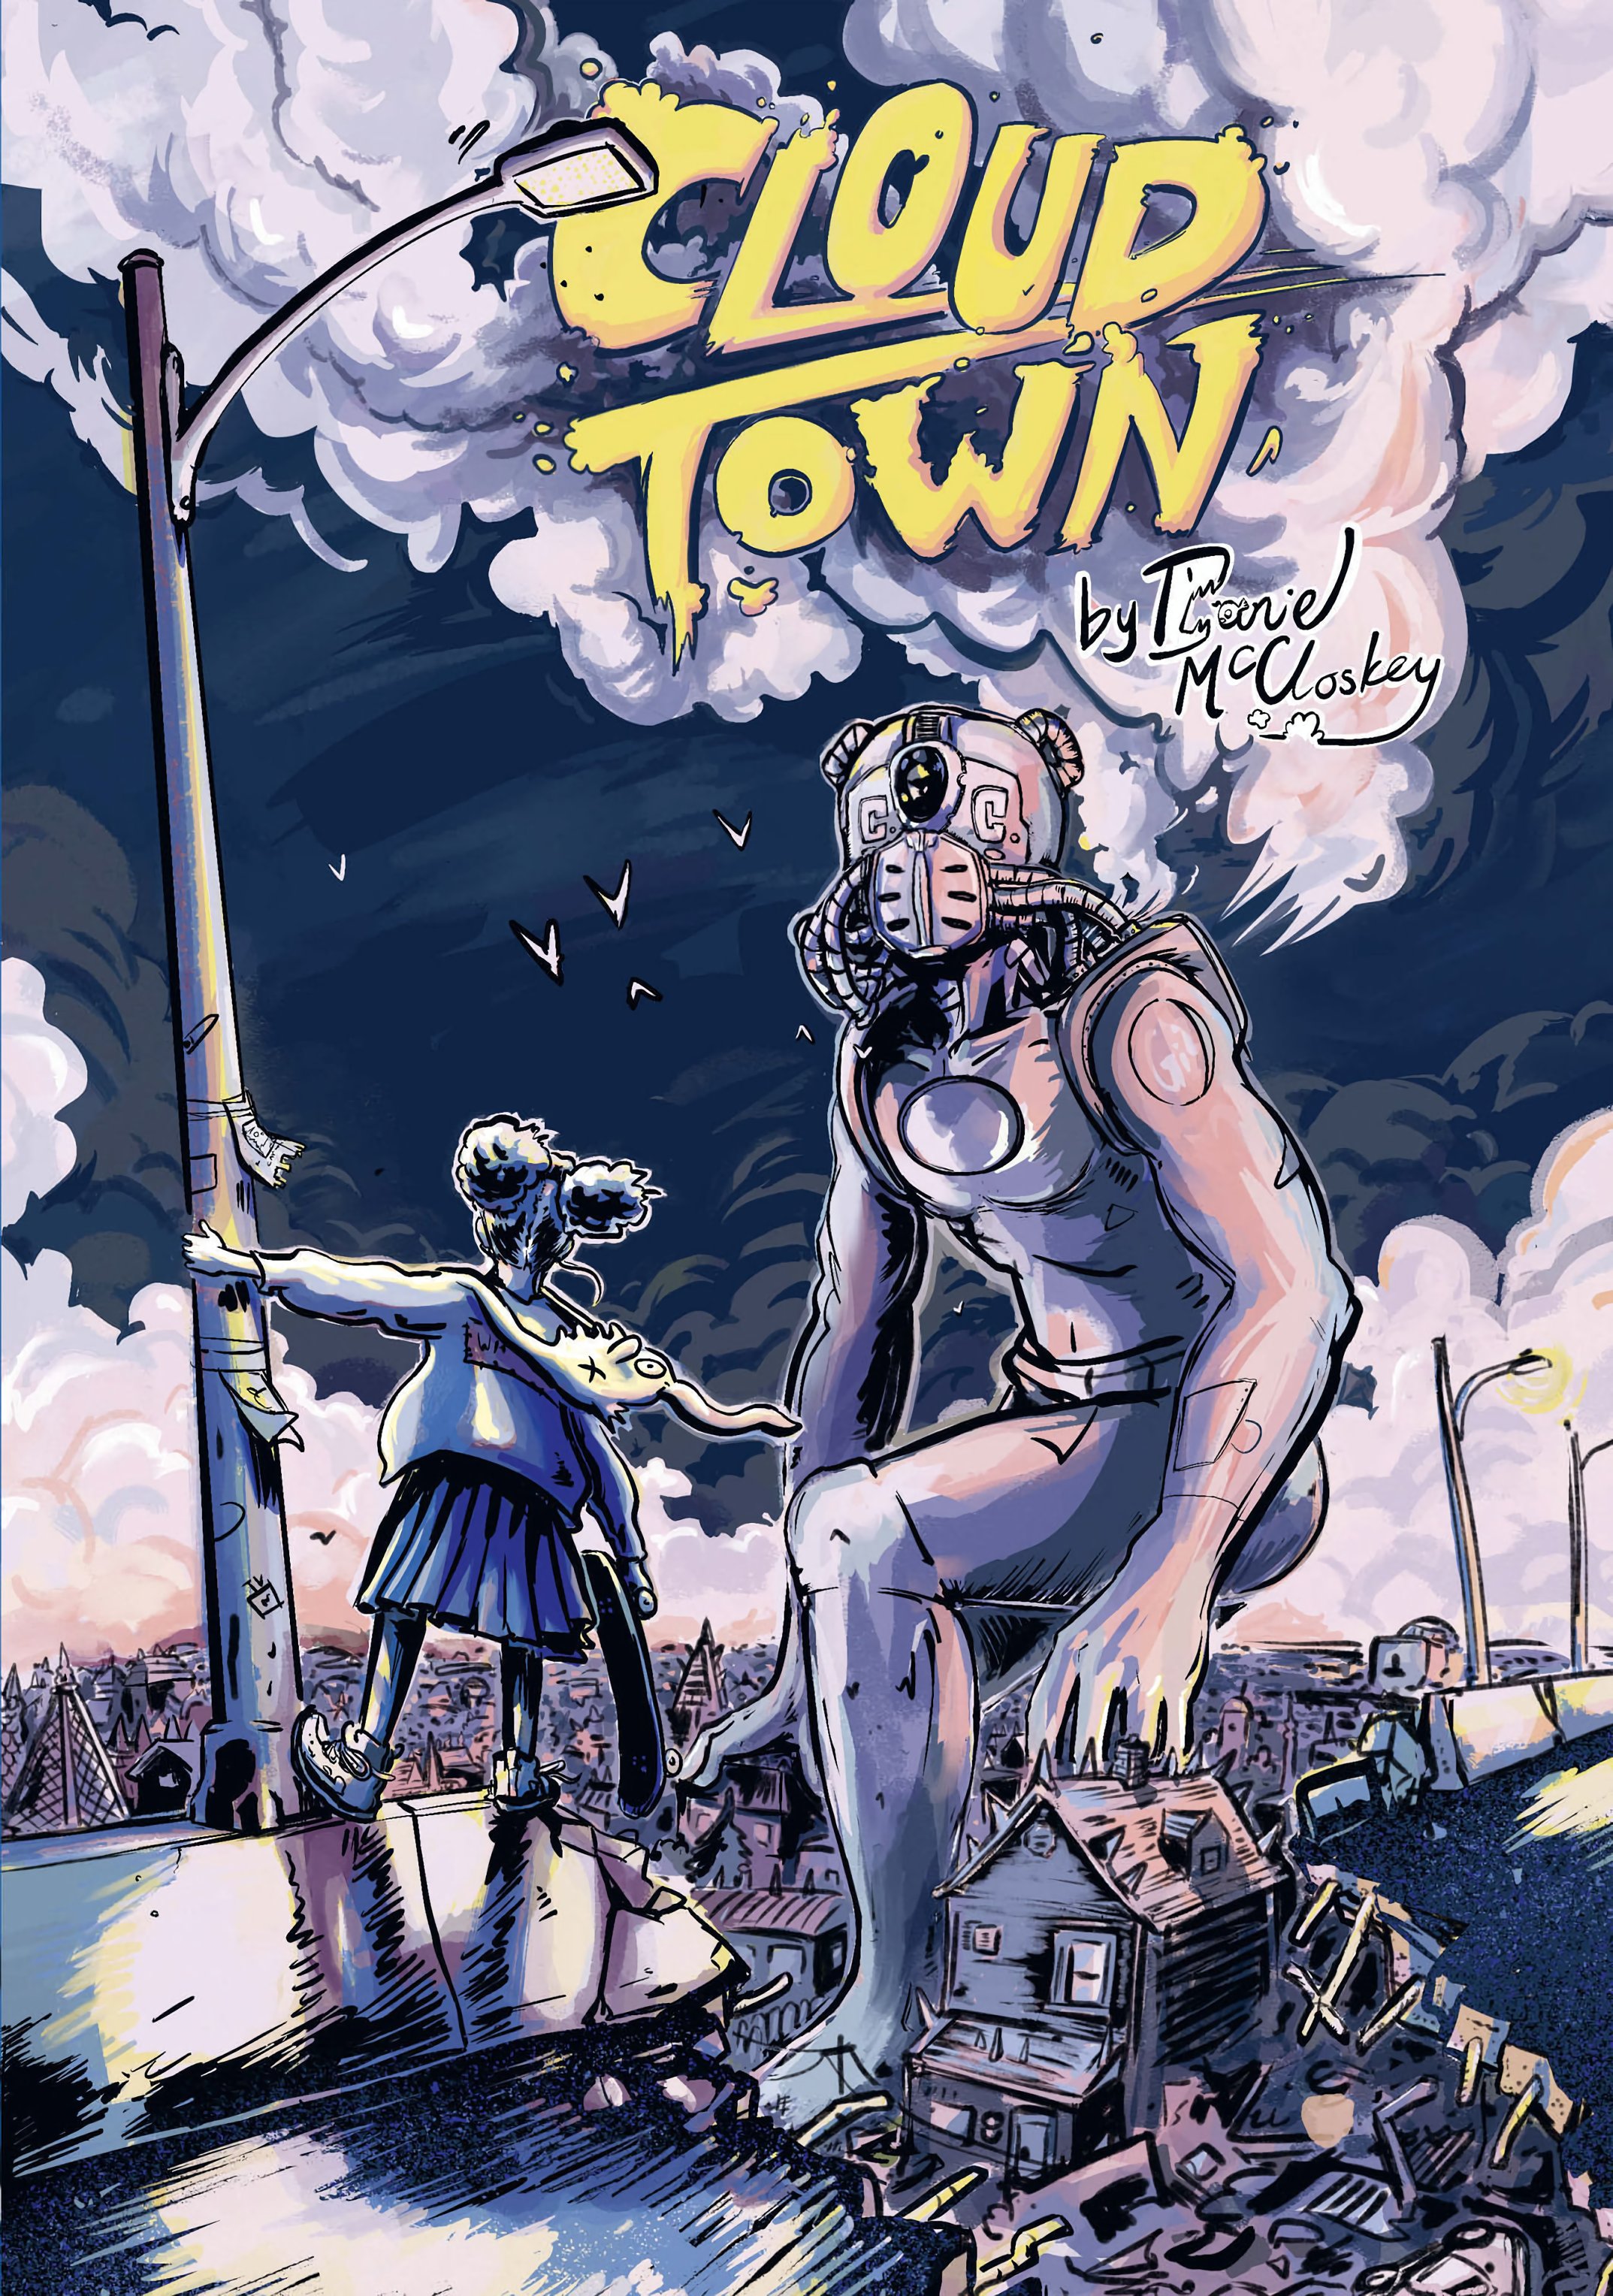 Read online Cloud Town comic -  Issue # TPB (Part 1) - 2